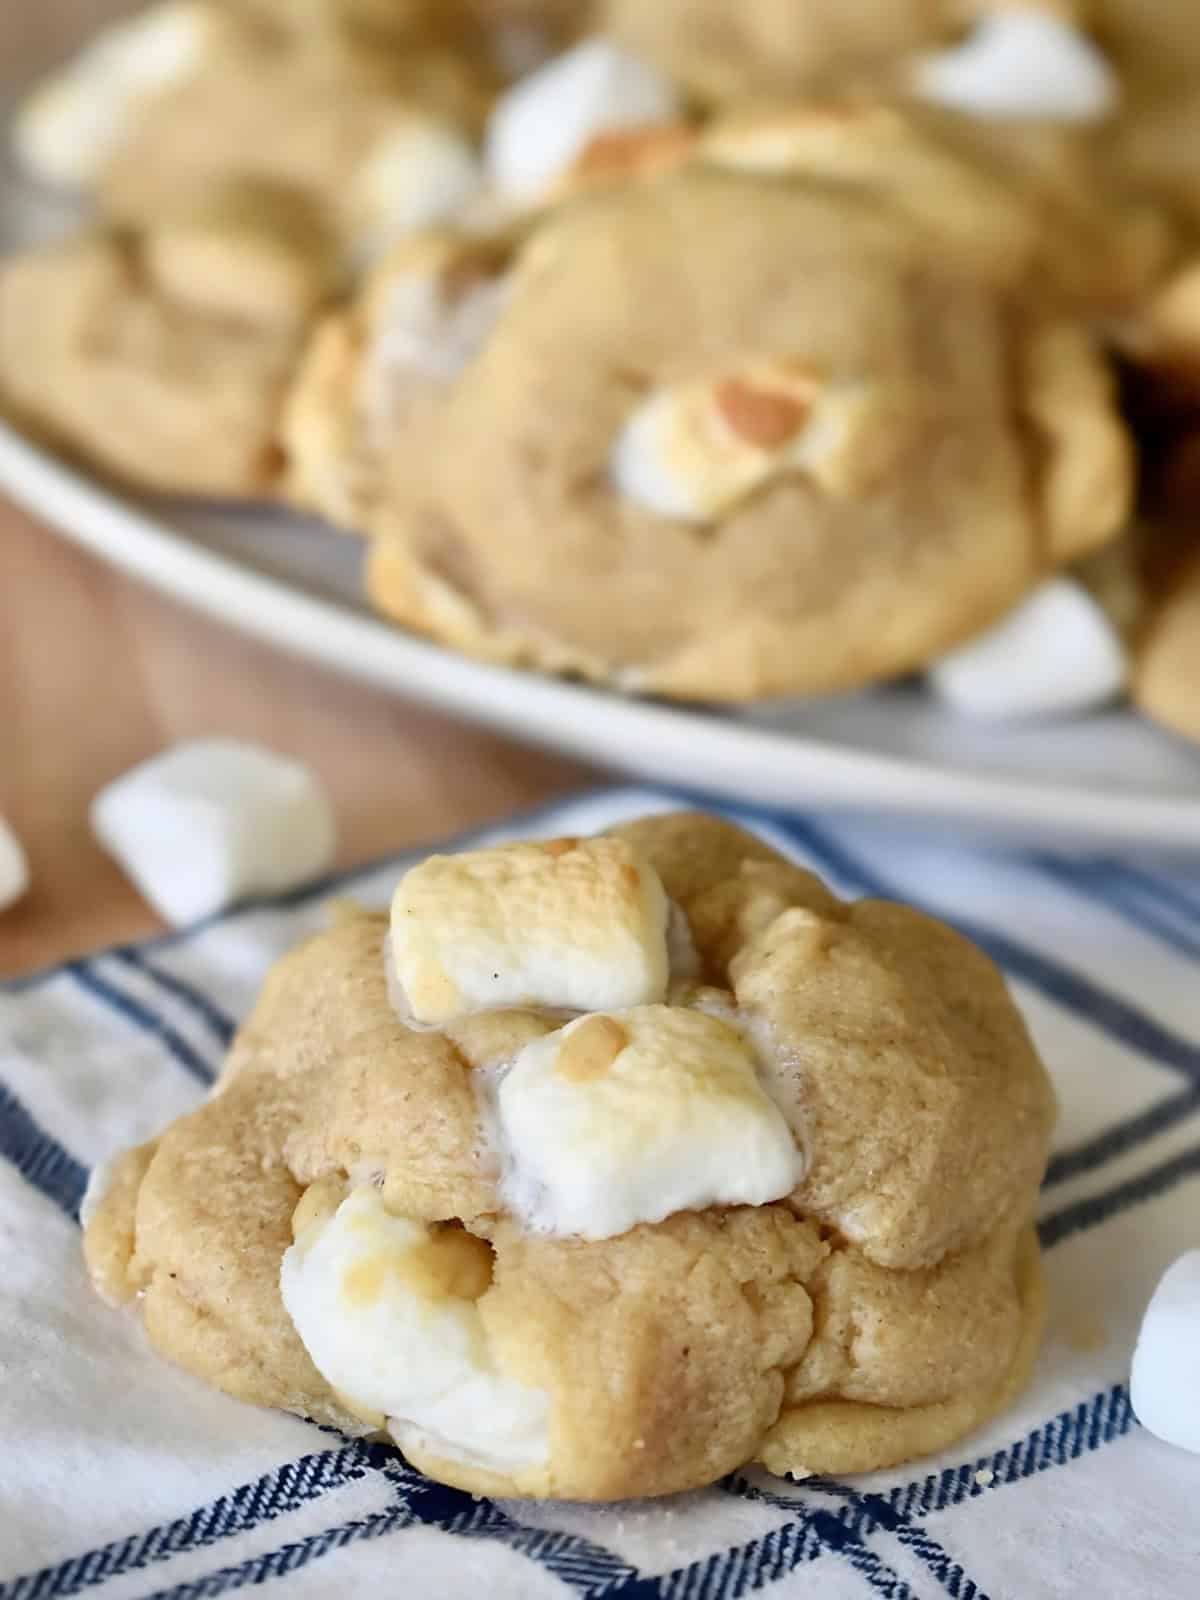 Peanut butter cookies with marshmallows.